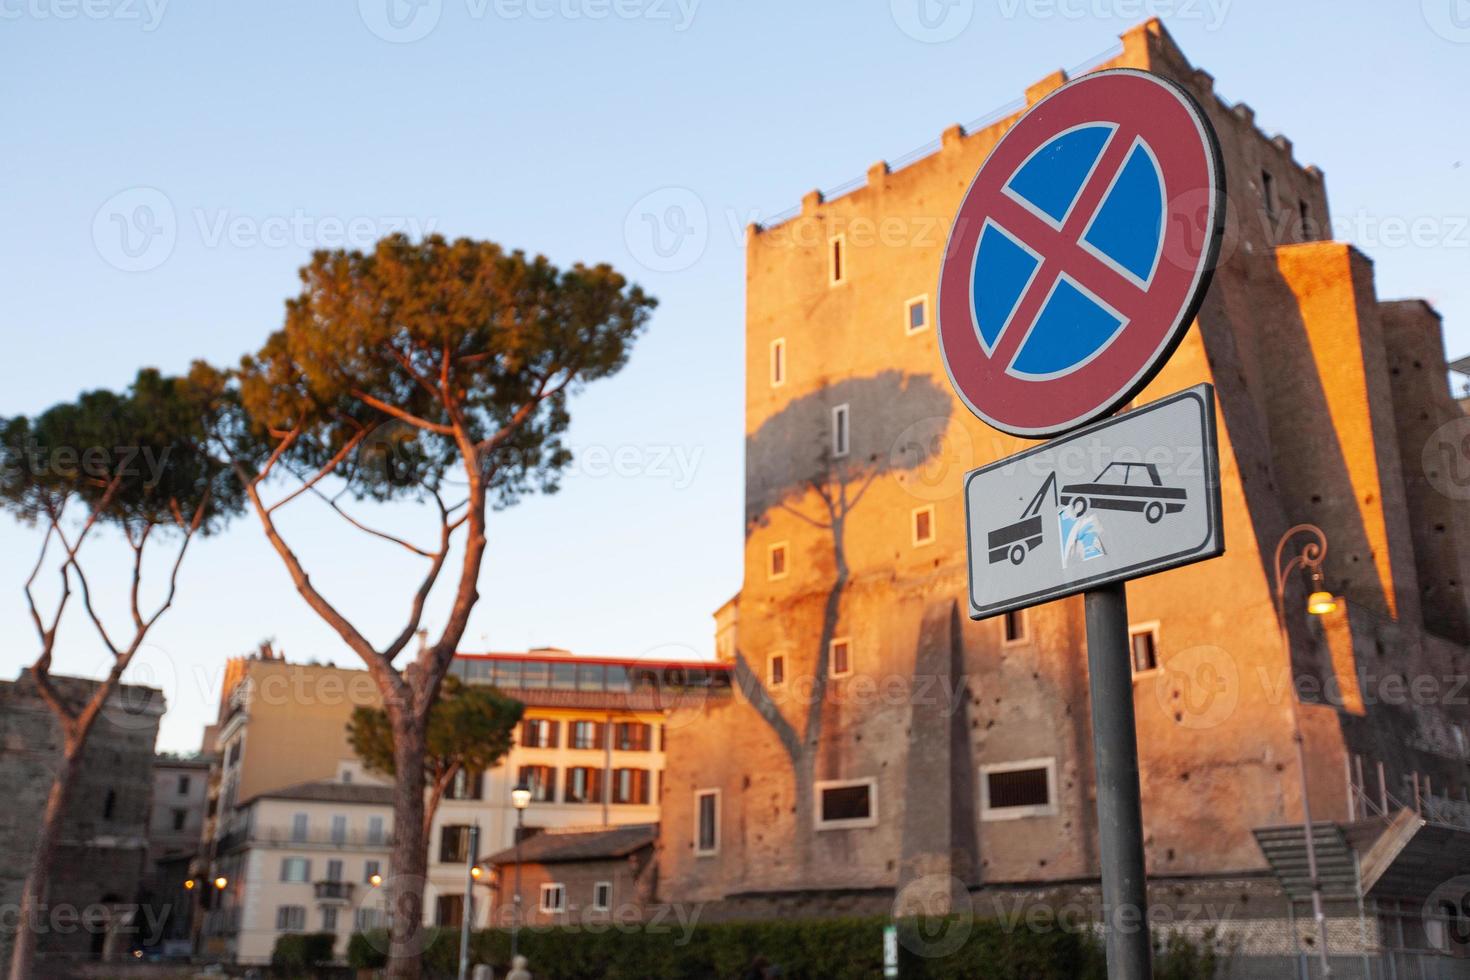 Rome, Italy, architecture, city center, street, historical buildings and road signs. photo